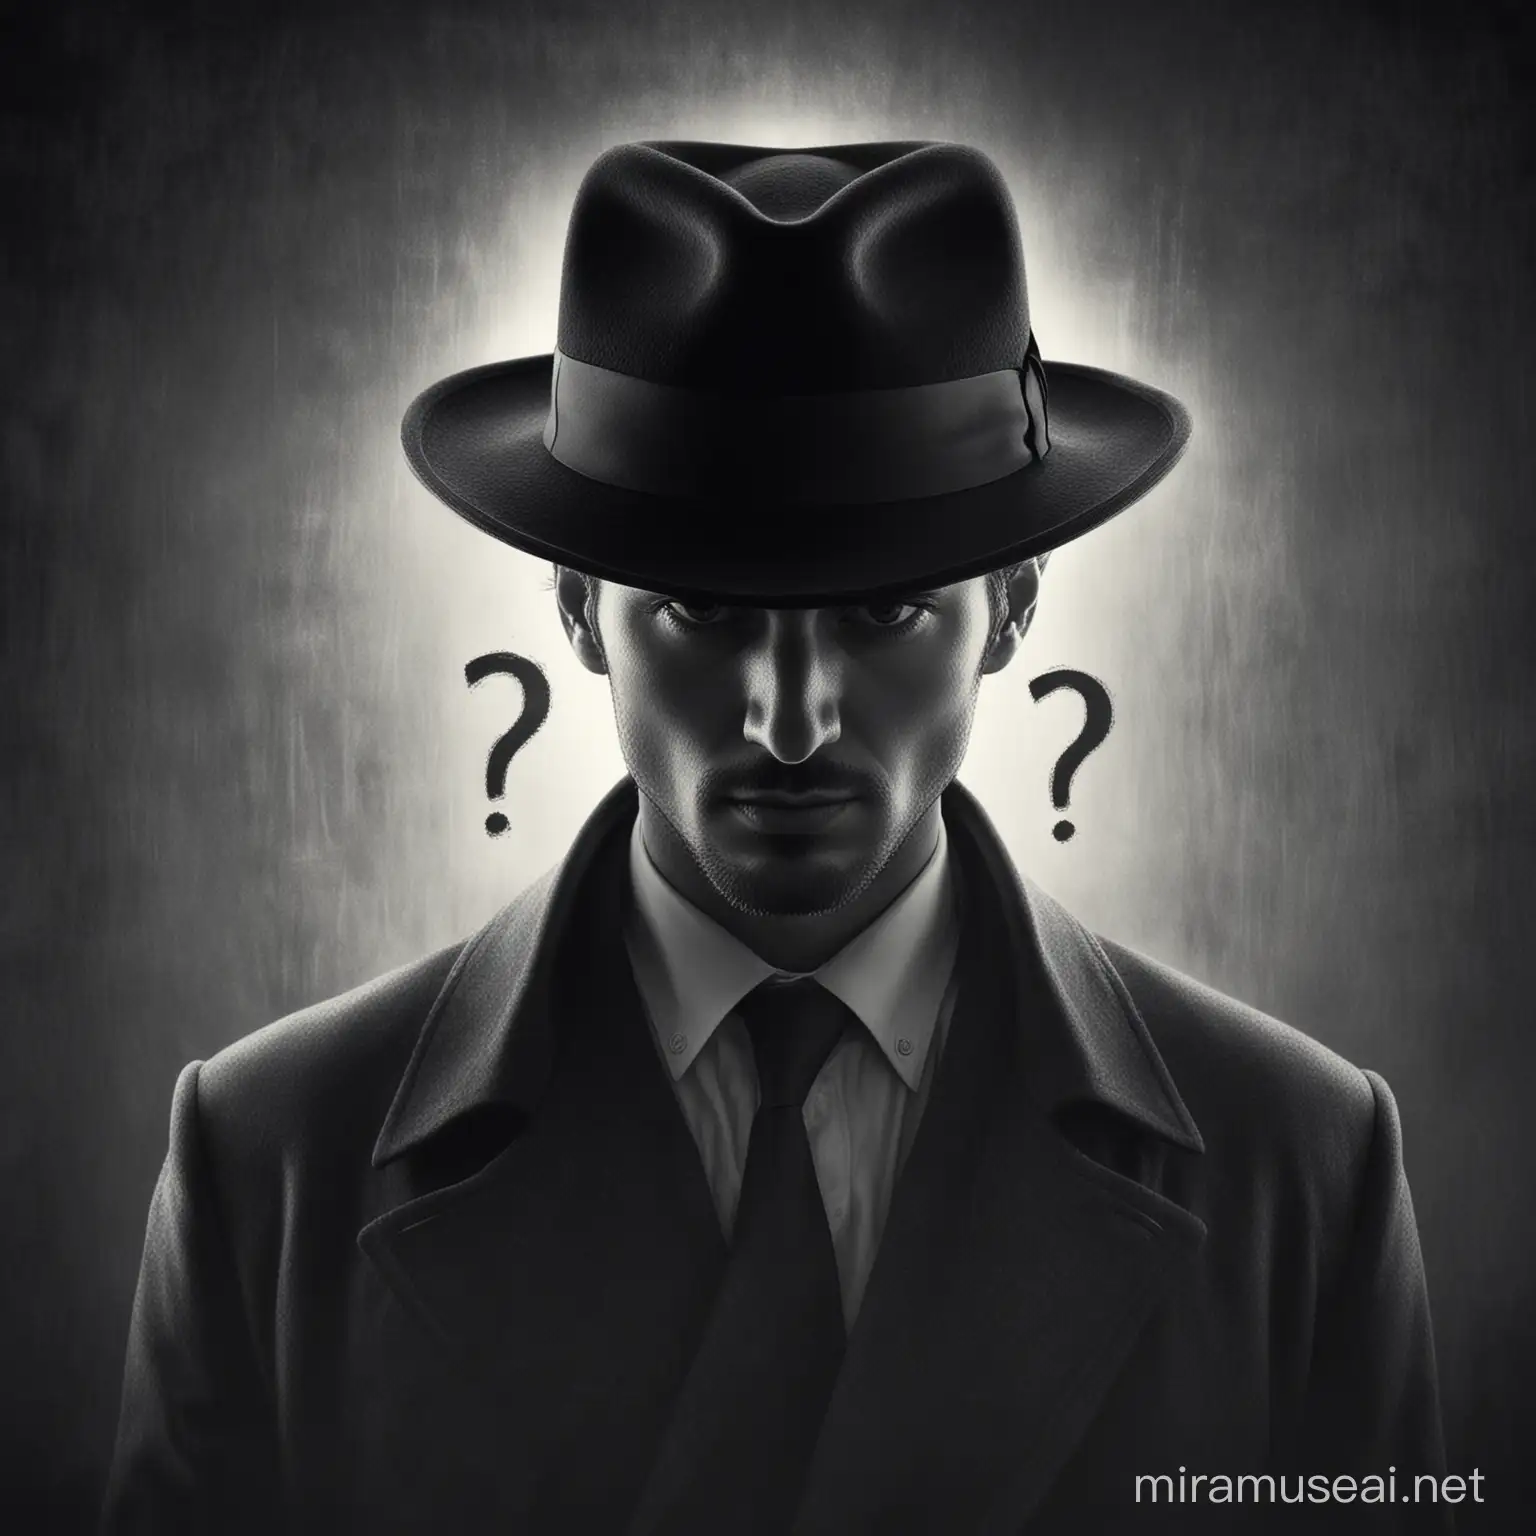 Mysterious Man in Long Coat and Fedora with Question Mark